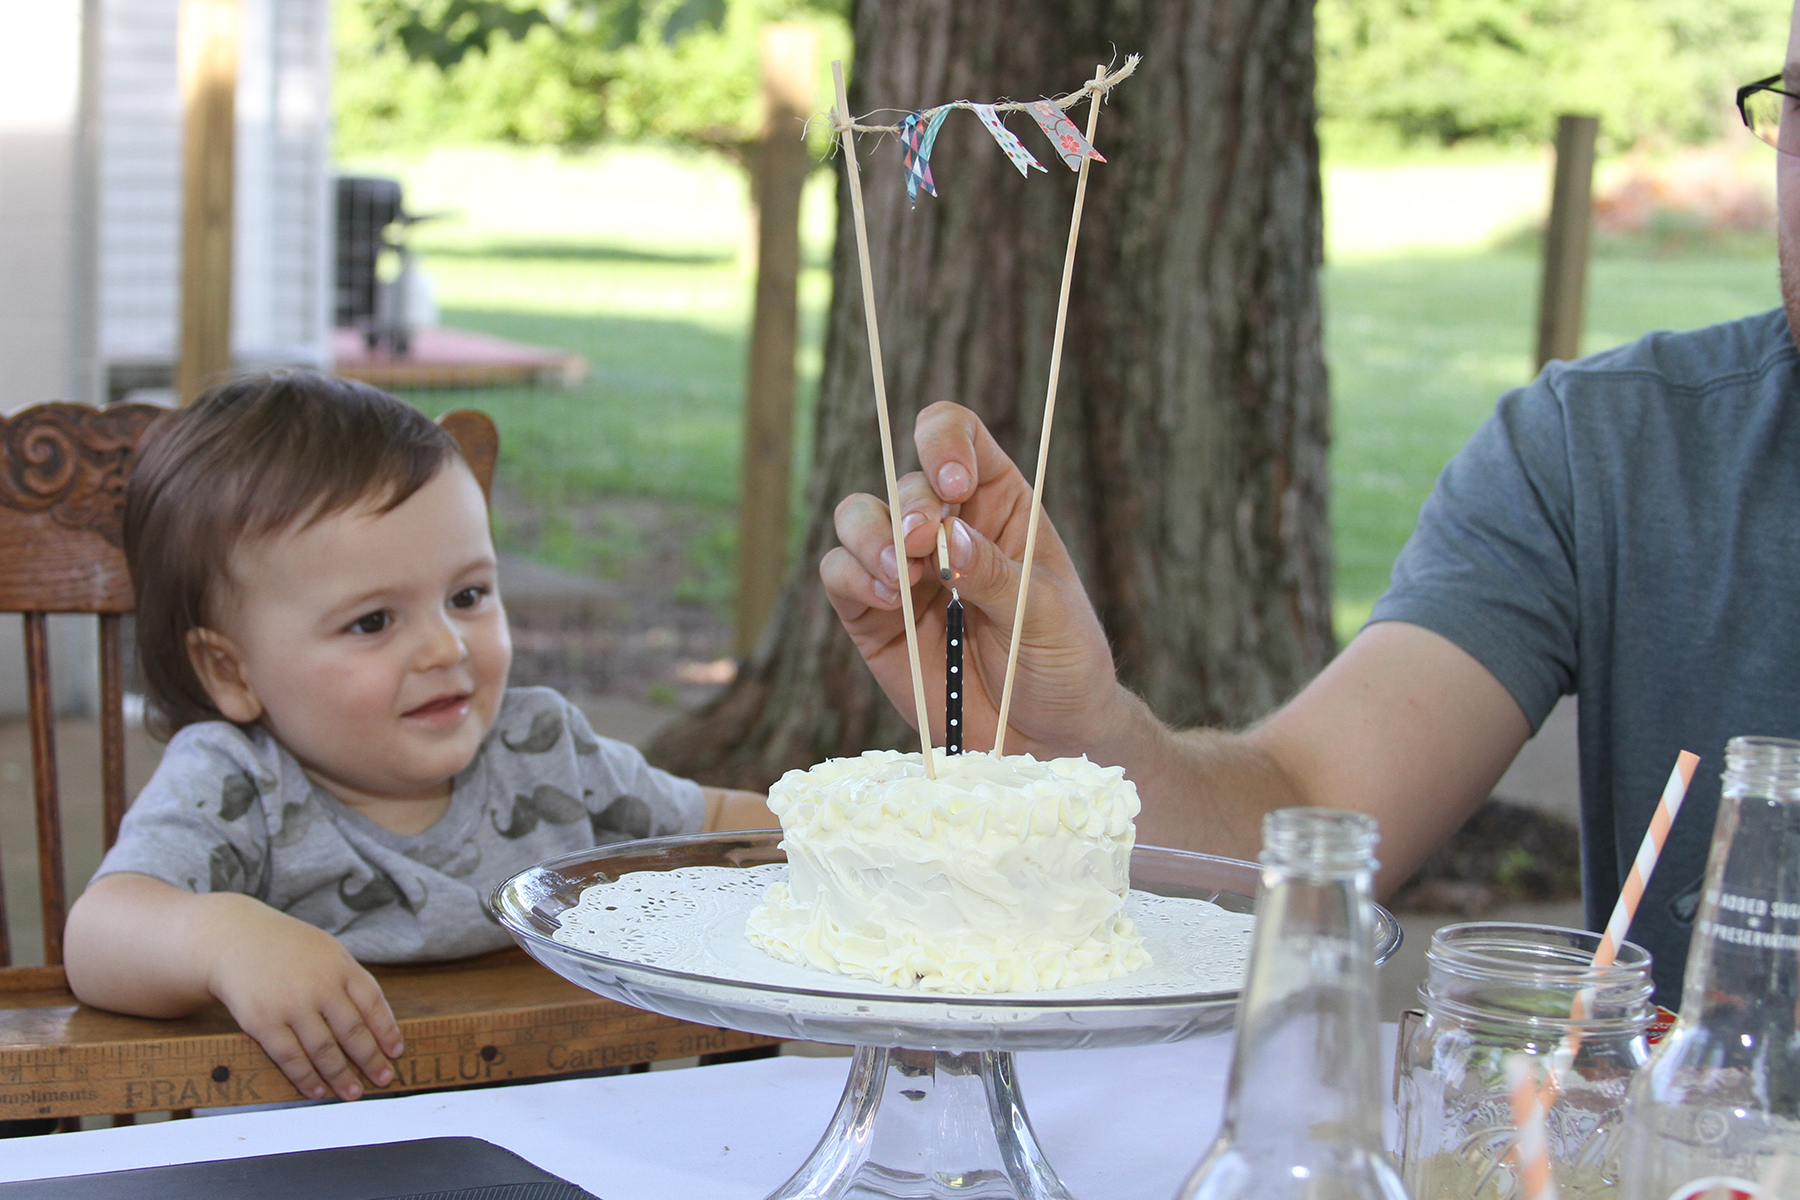 A summer "birthday" themed first birthday party | the lovelylauralife.com